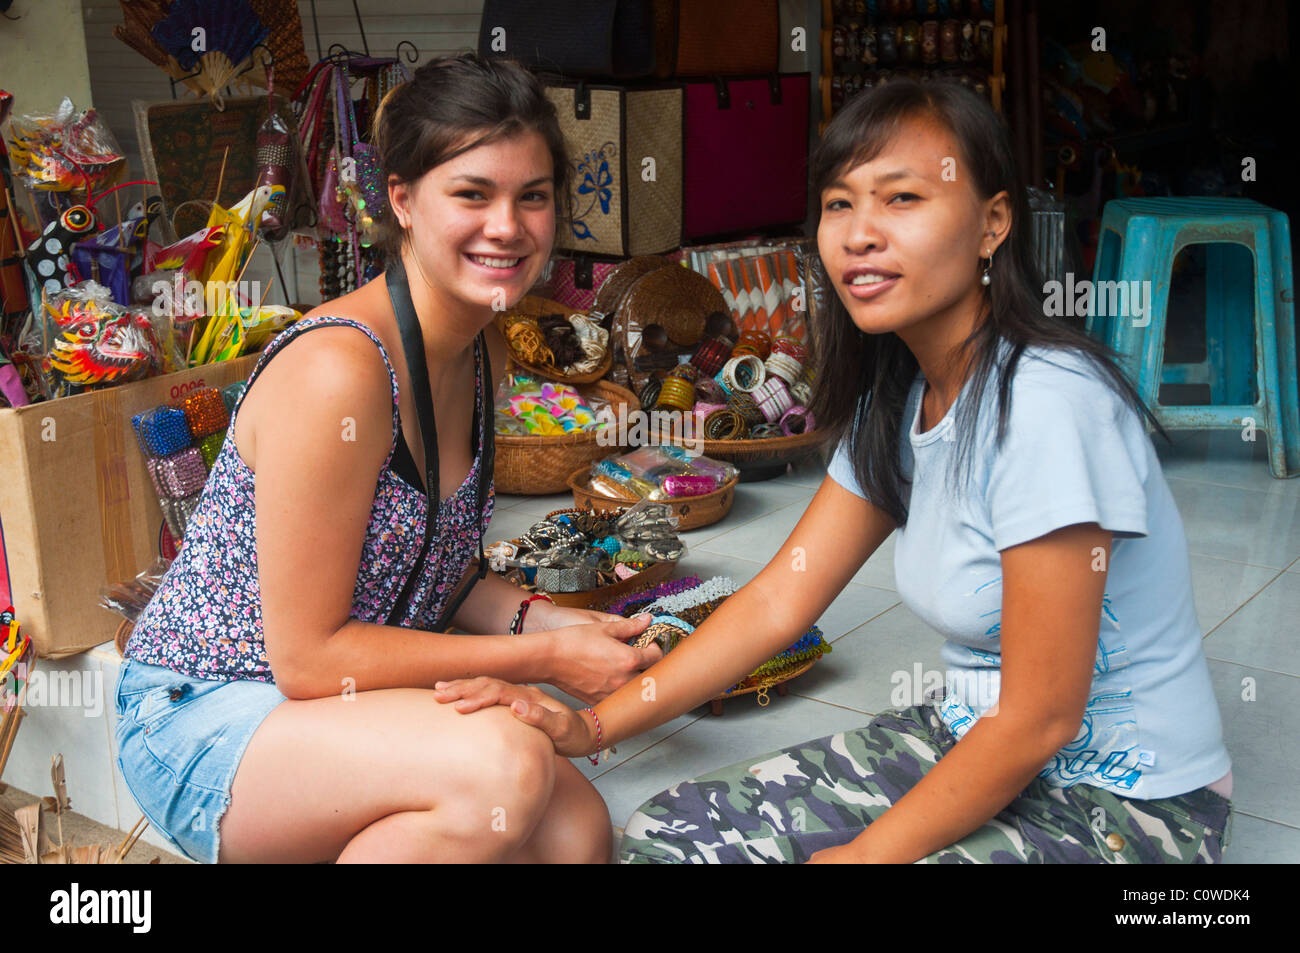 Tourist bargaining for souvenirs in Ubud Bali Indonesia Stock Photo